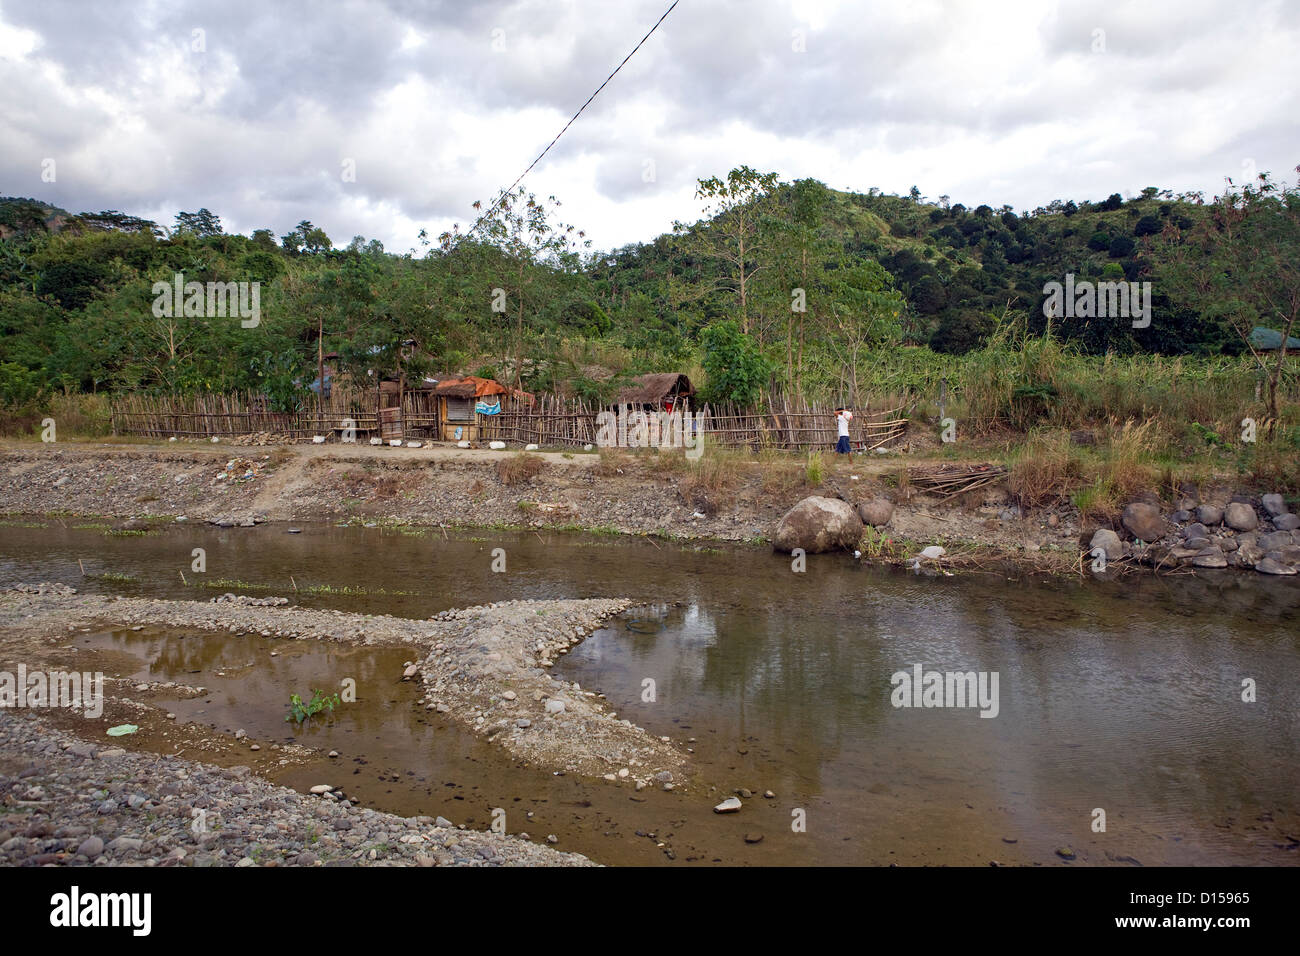 Philippine mountain village along the banking of the Subic River near Subic Bay, Luzon Island, Philippines. Stock Photo